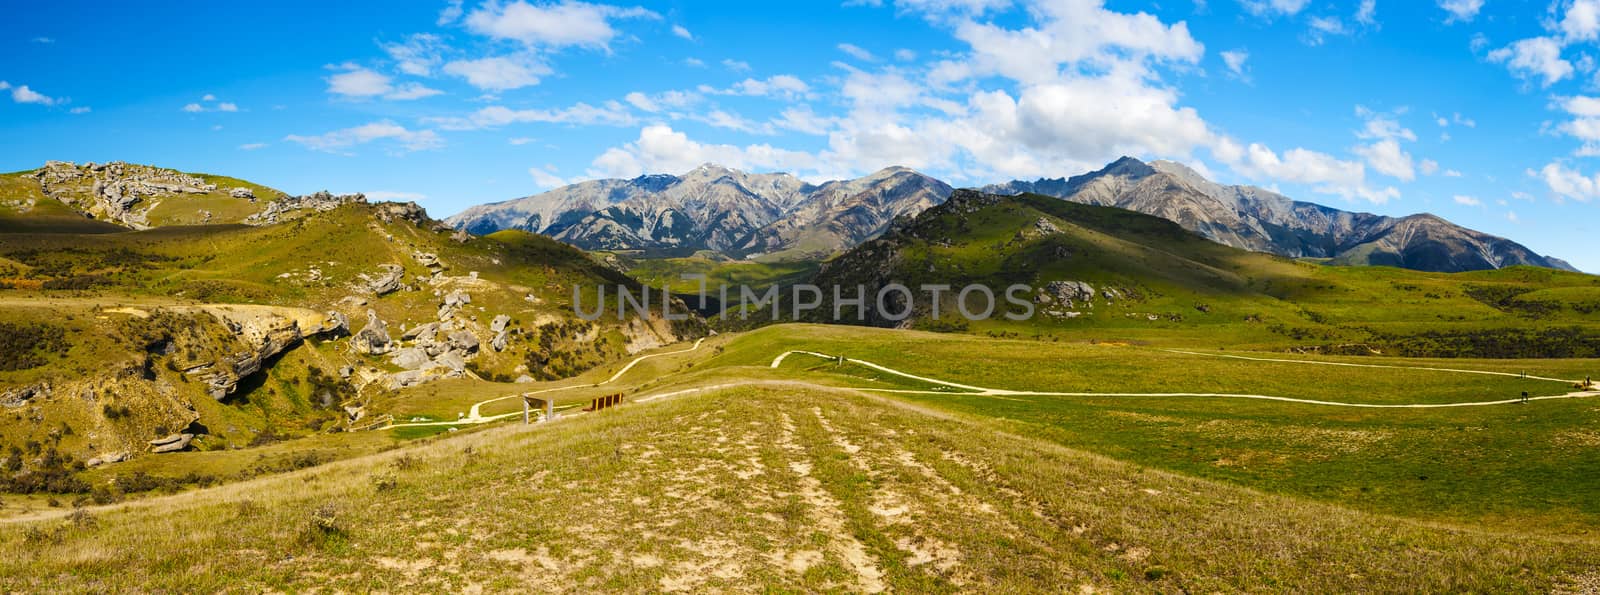 Vivid panoramic photo of mountains at Castle Hill. This area is well known to climbers and people liking bouldering. Kura Tawhiti - as it is called by native Maori is a place of spiritual importance as well. Canterbury, New Zealand